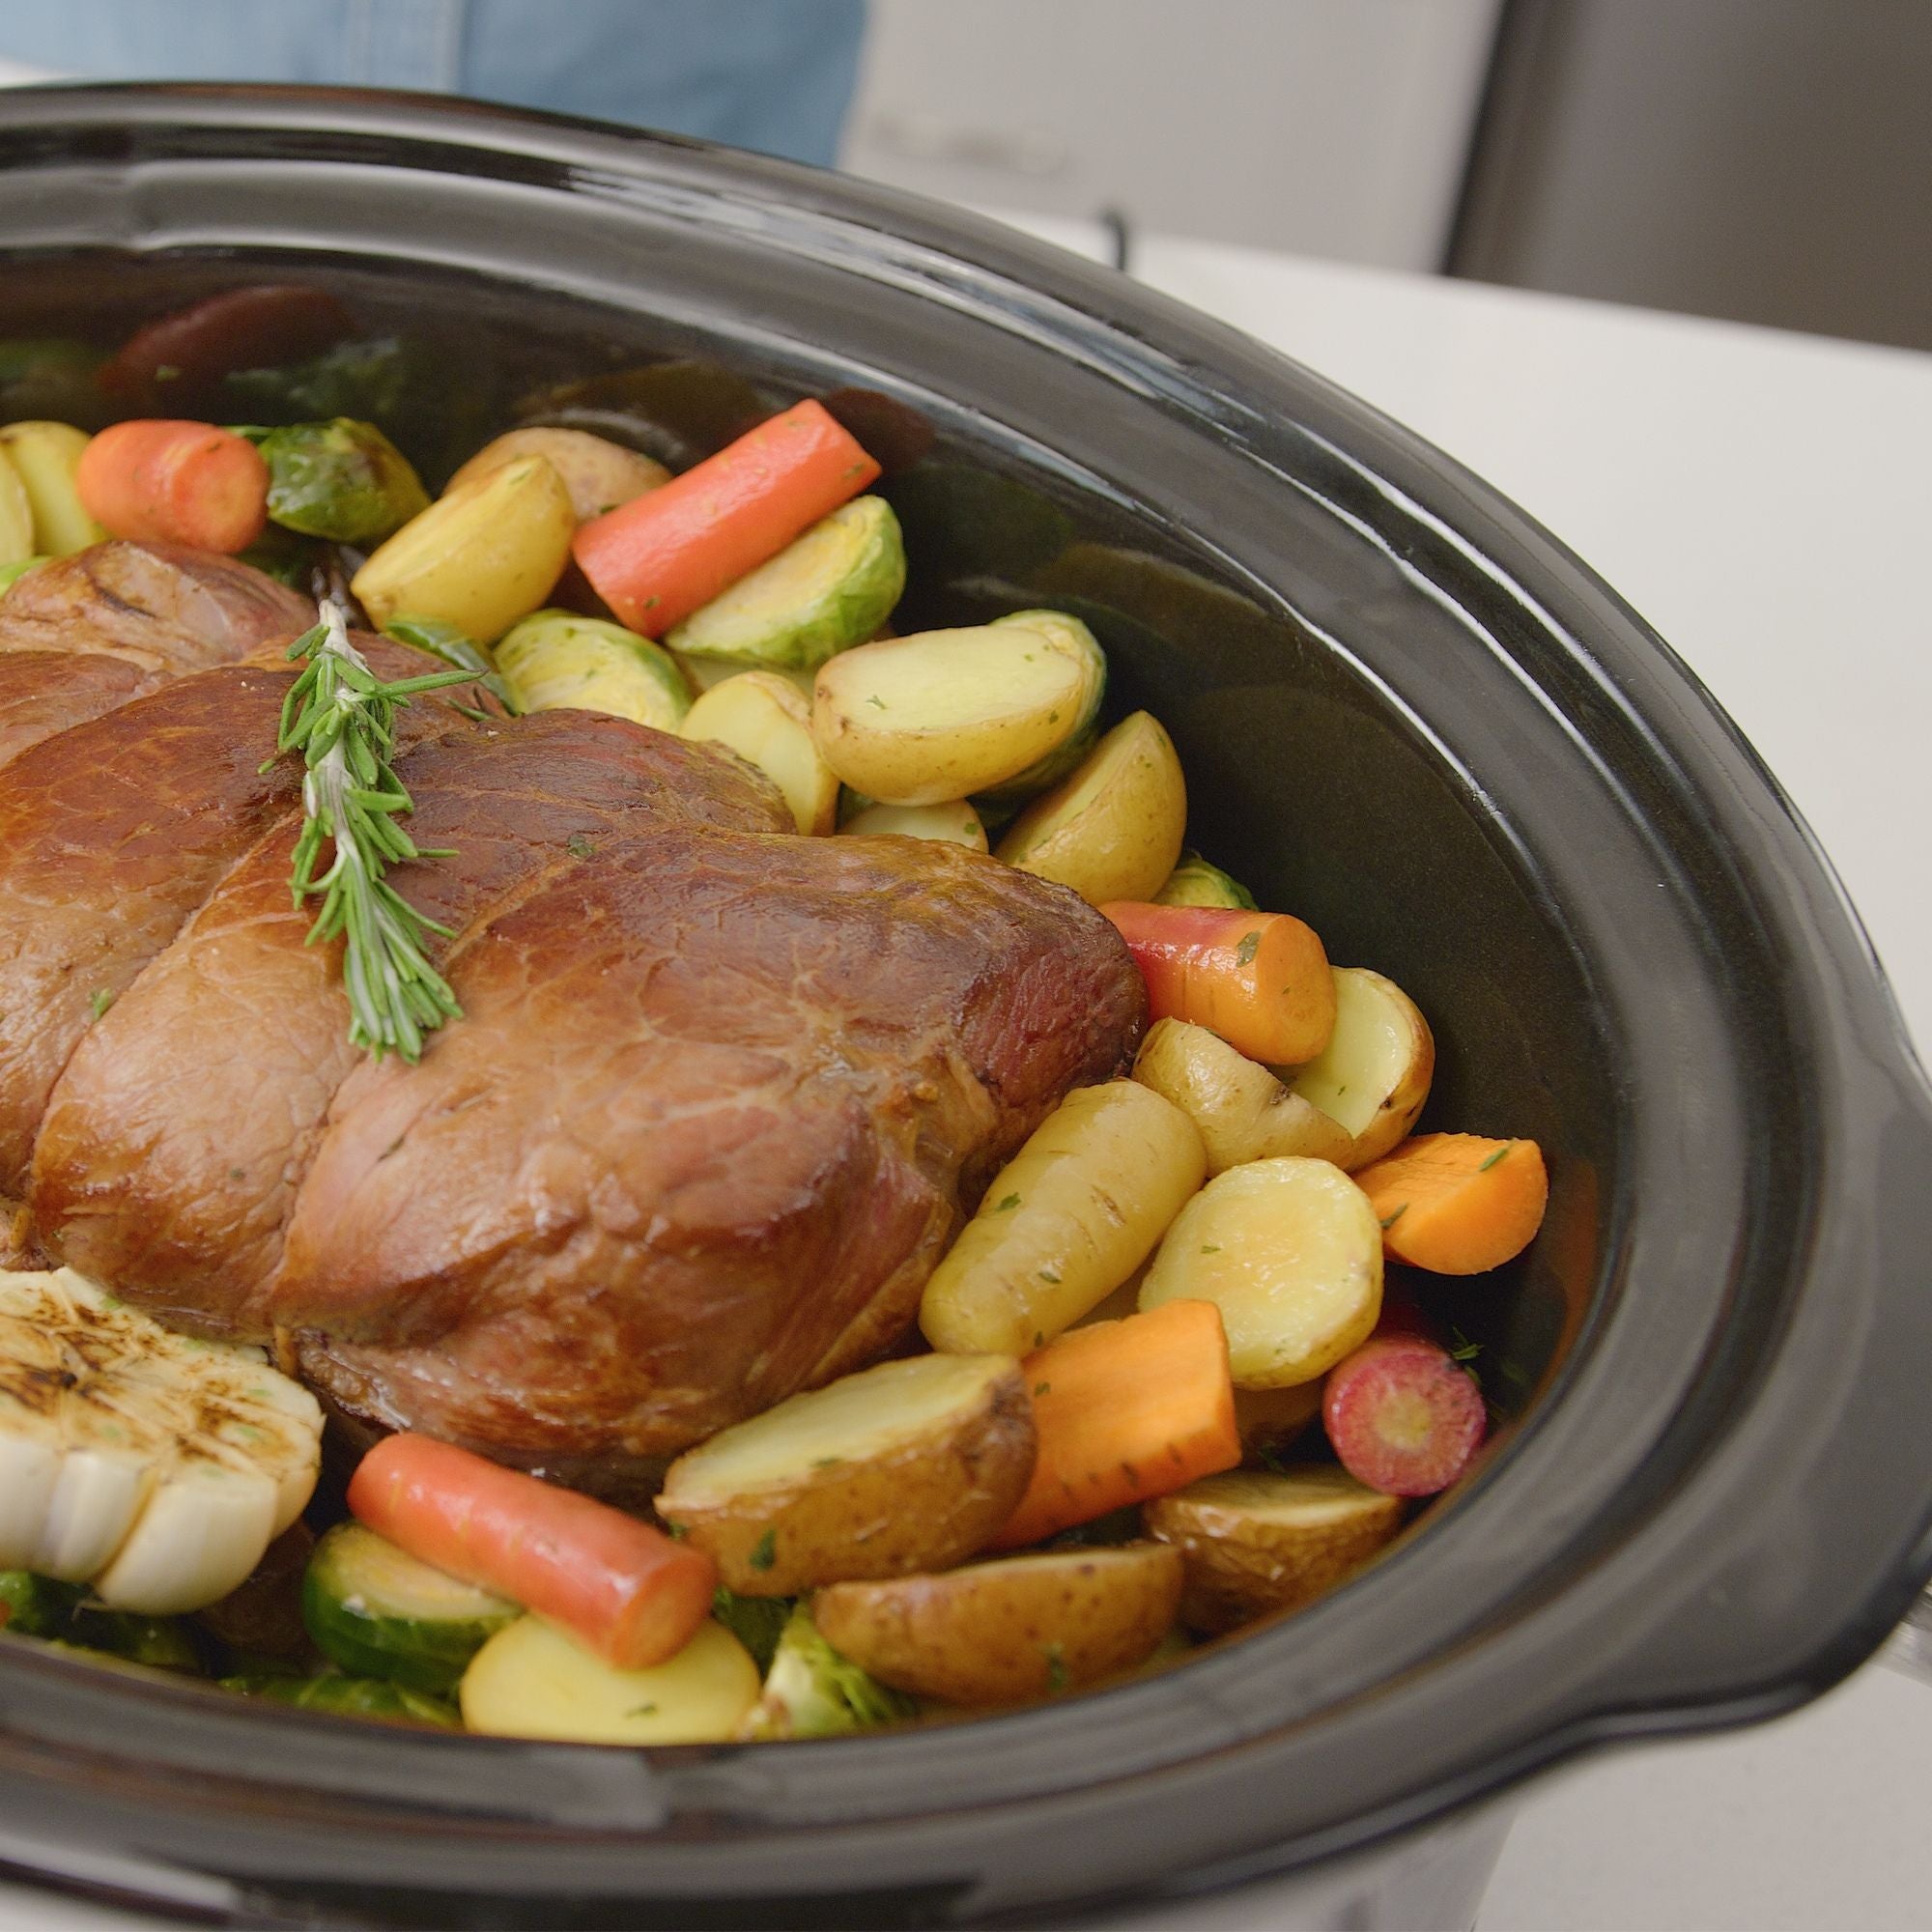 Closeup of a beef roast on a bed of carrots, potatoes, and brussels sprouts with roasted garlic and a sprig of fresh rosemary in the 7-qt Kenmore programmable slow cooker